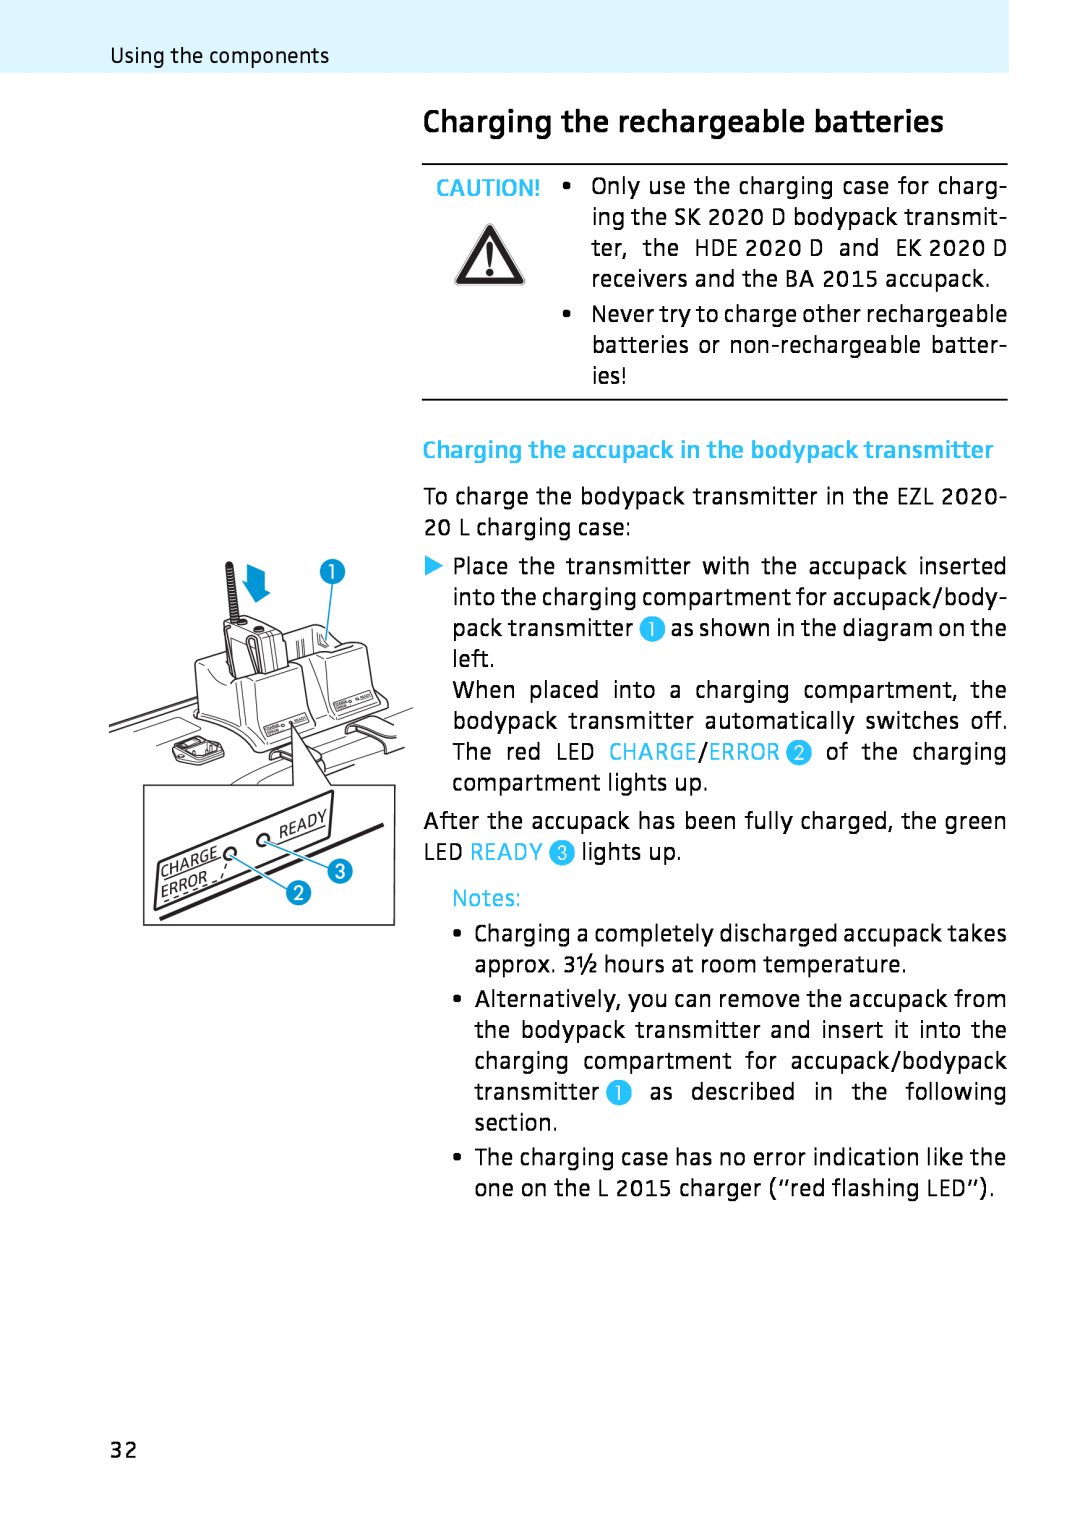 Sennheiser 2020 instruction manual Charging the rechargeable batteries, Charging the accupack in the bodypack transmitter 